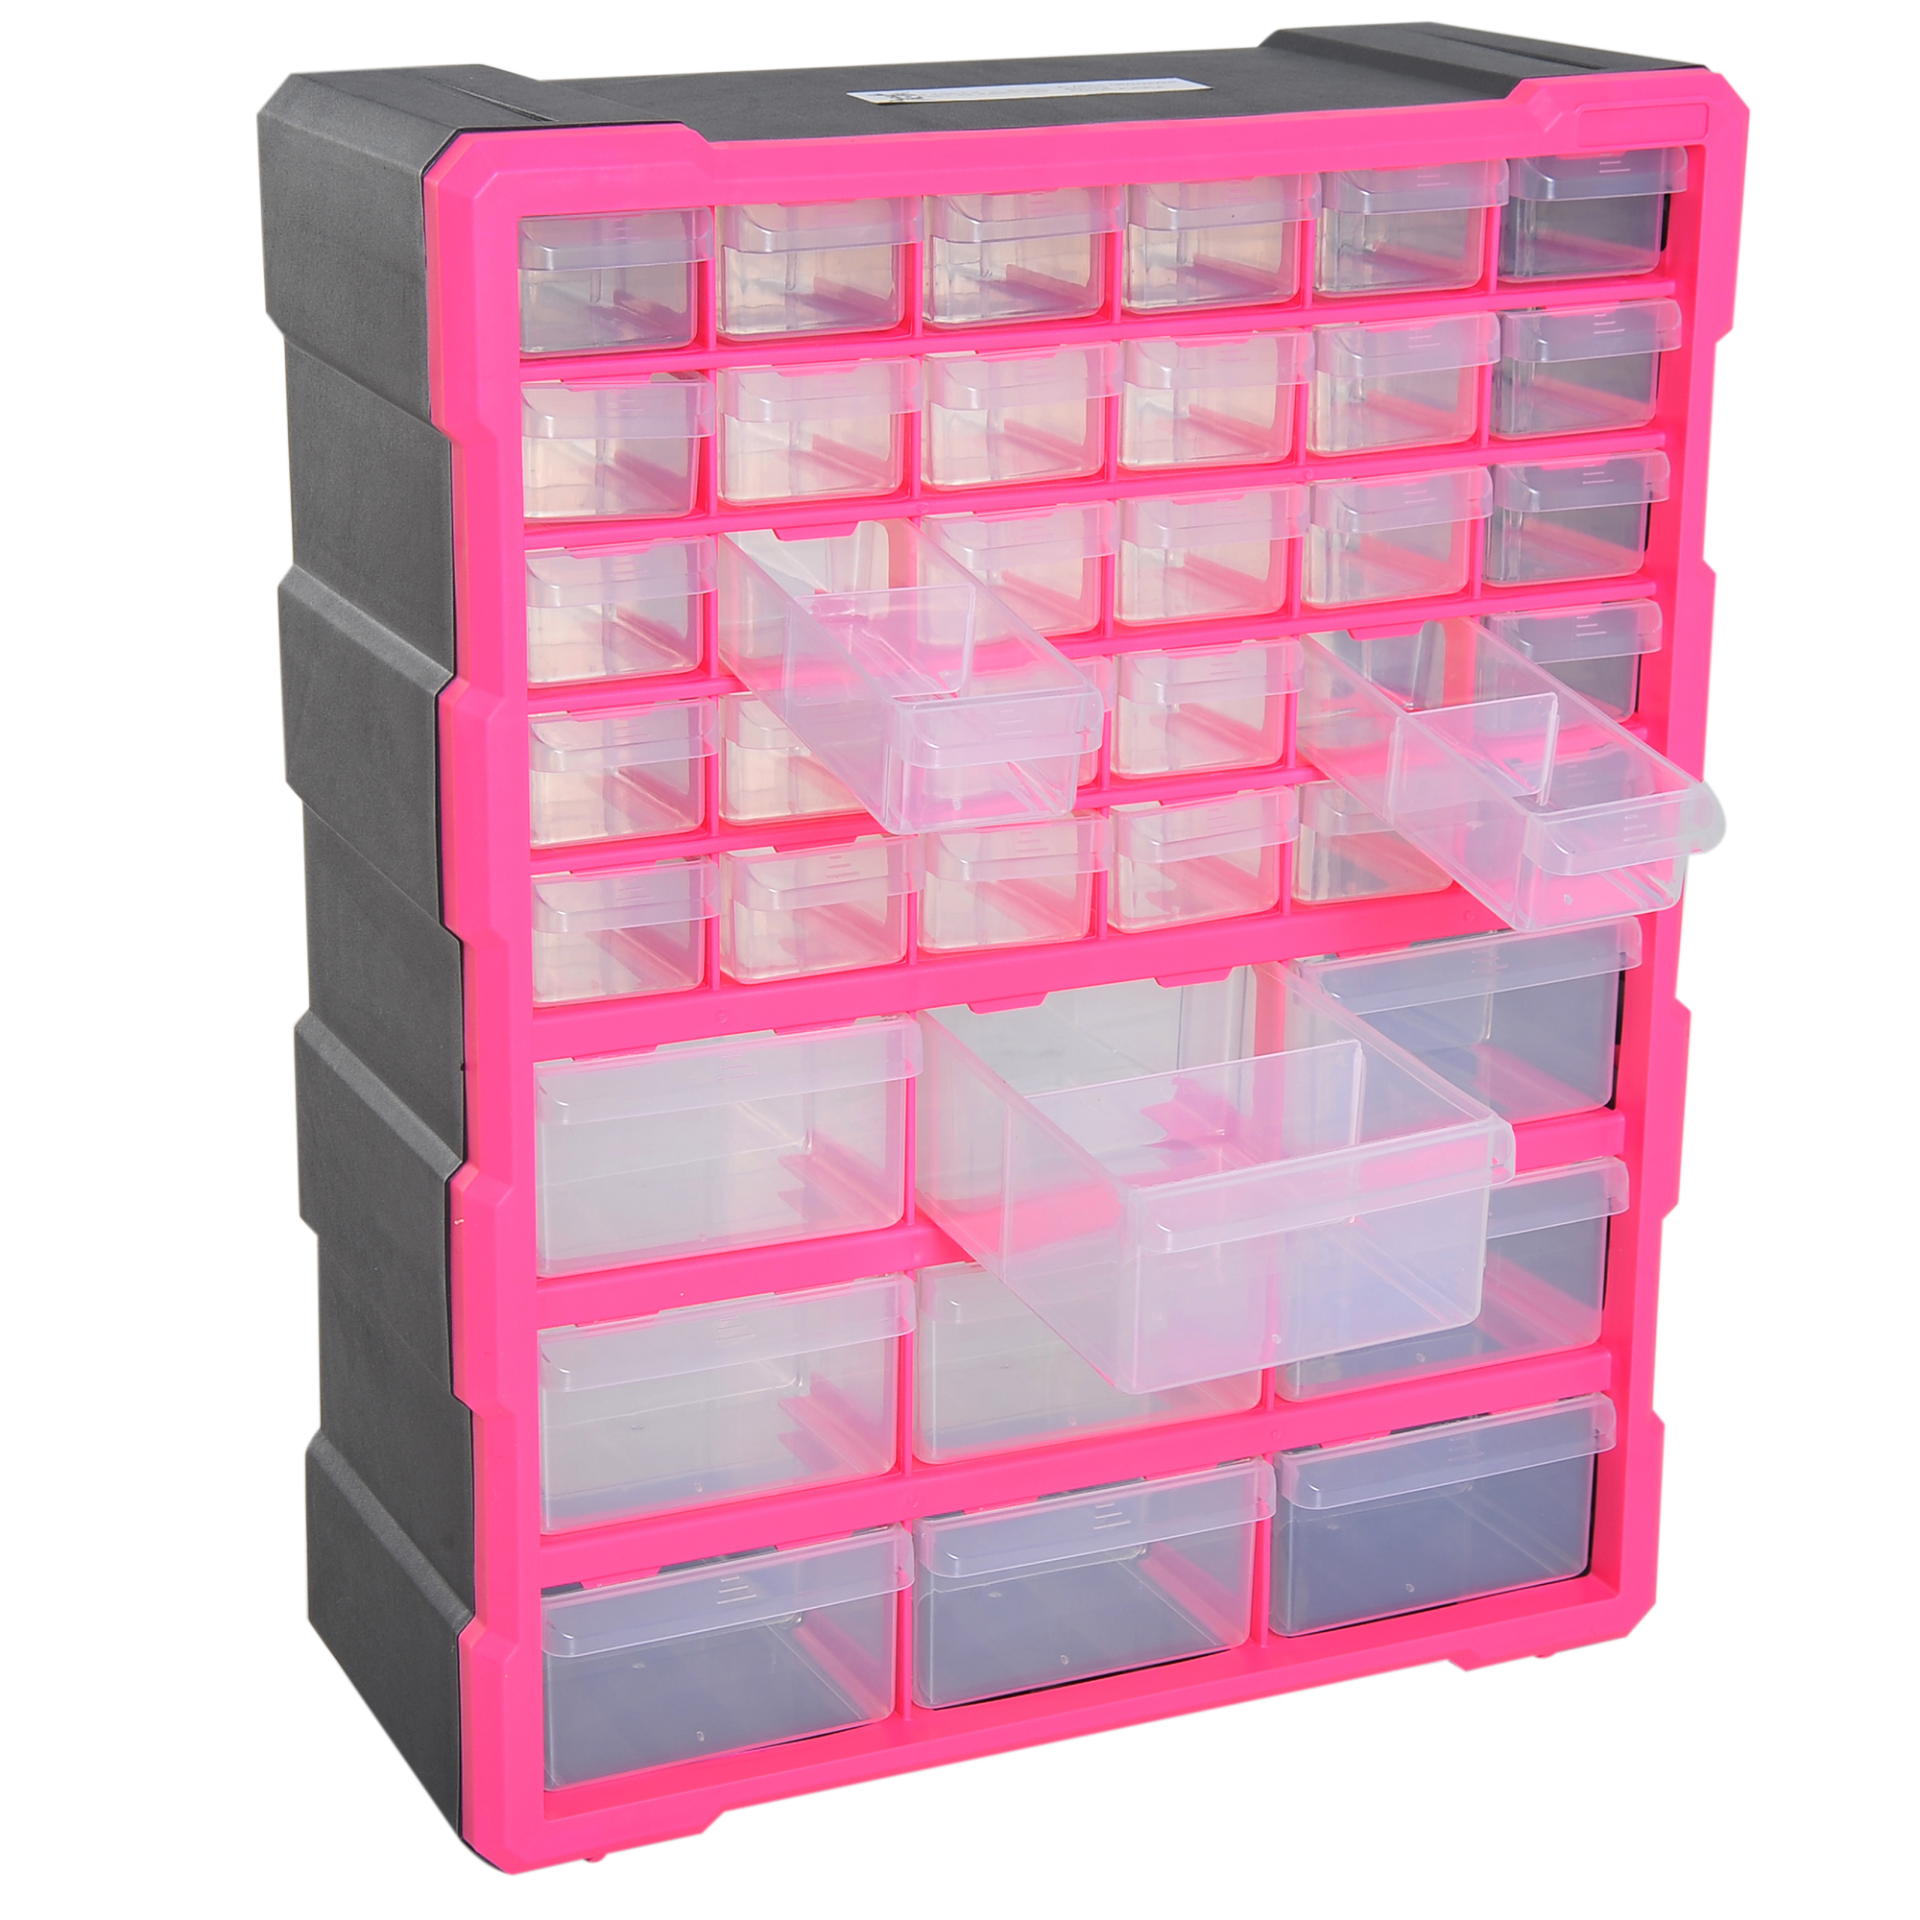 DURHAND 39 Drawers Parts Organiser Wall Mount Tools Storage Cabinet Small Nuts Bolts Garage Clear